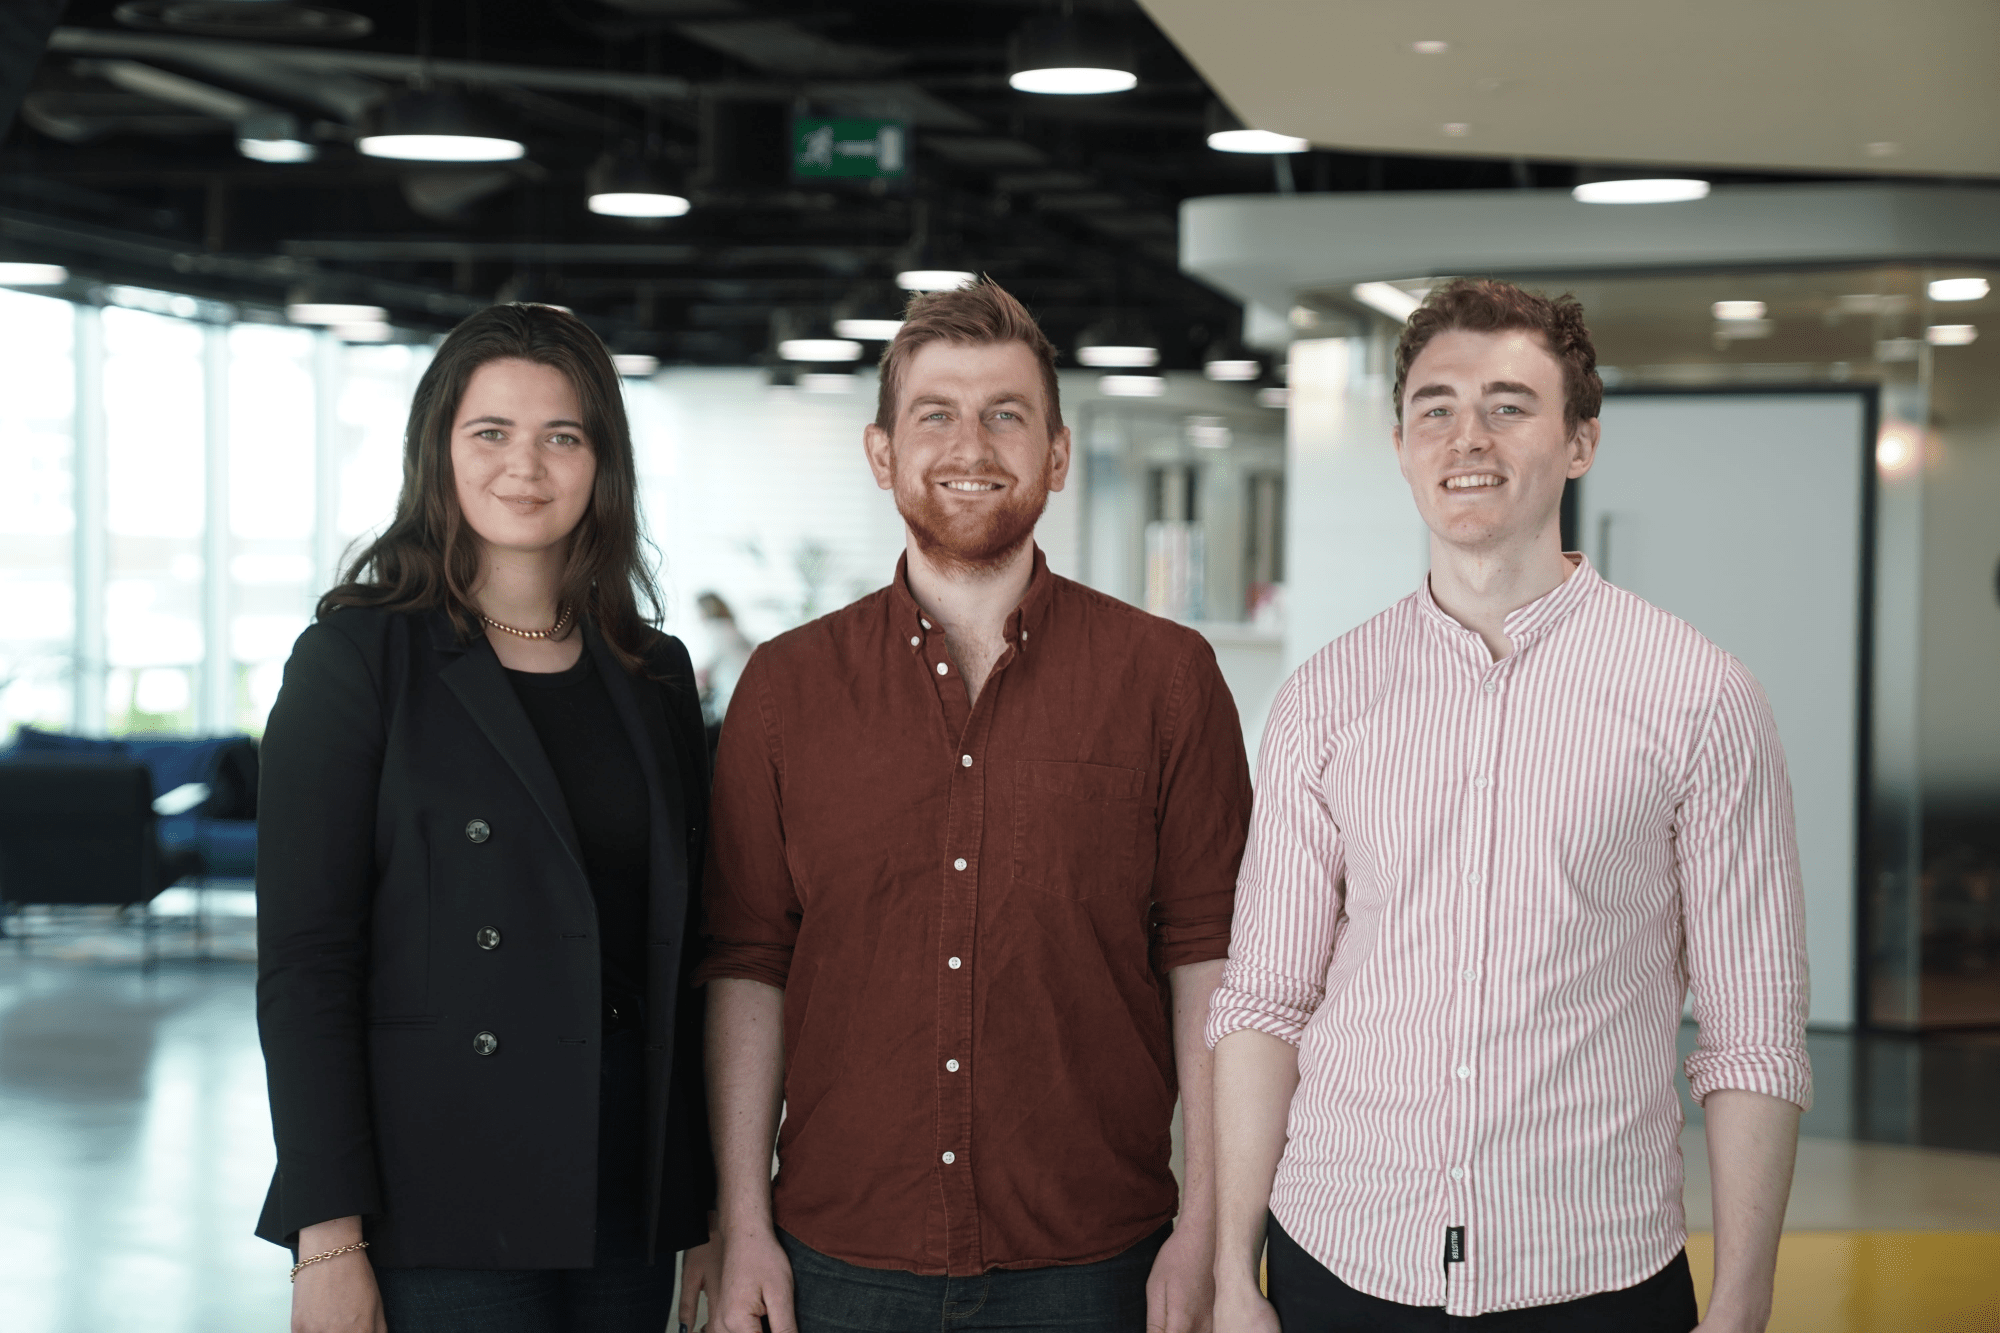 London-based TitanML launches LLM solution Takeoff after raising $2.8M